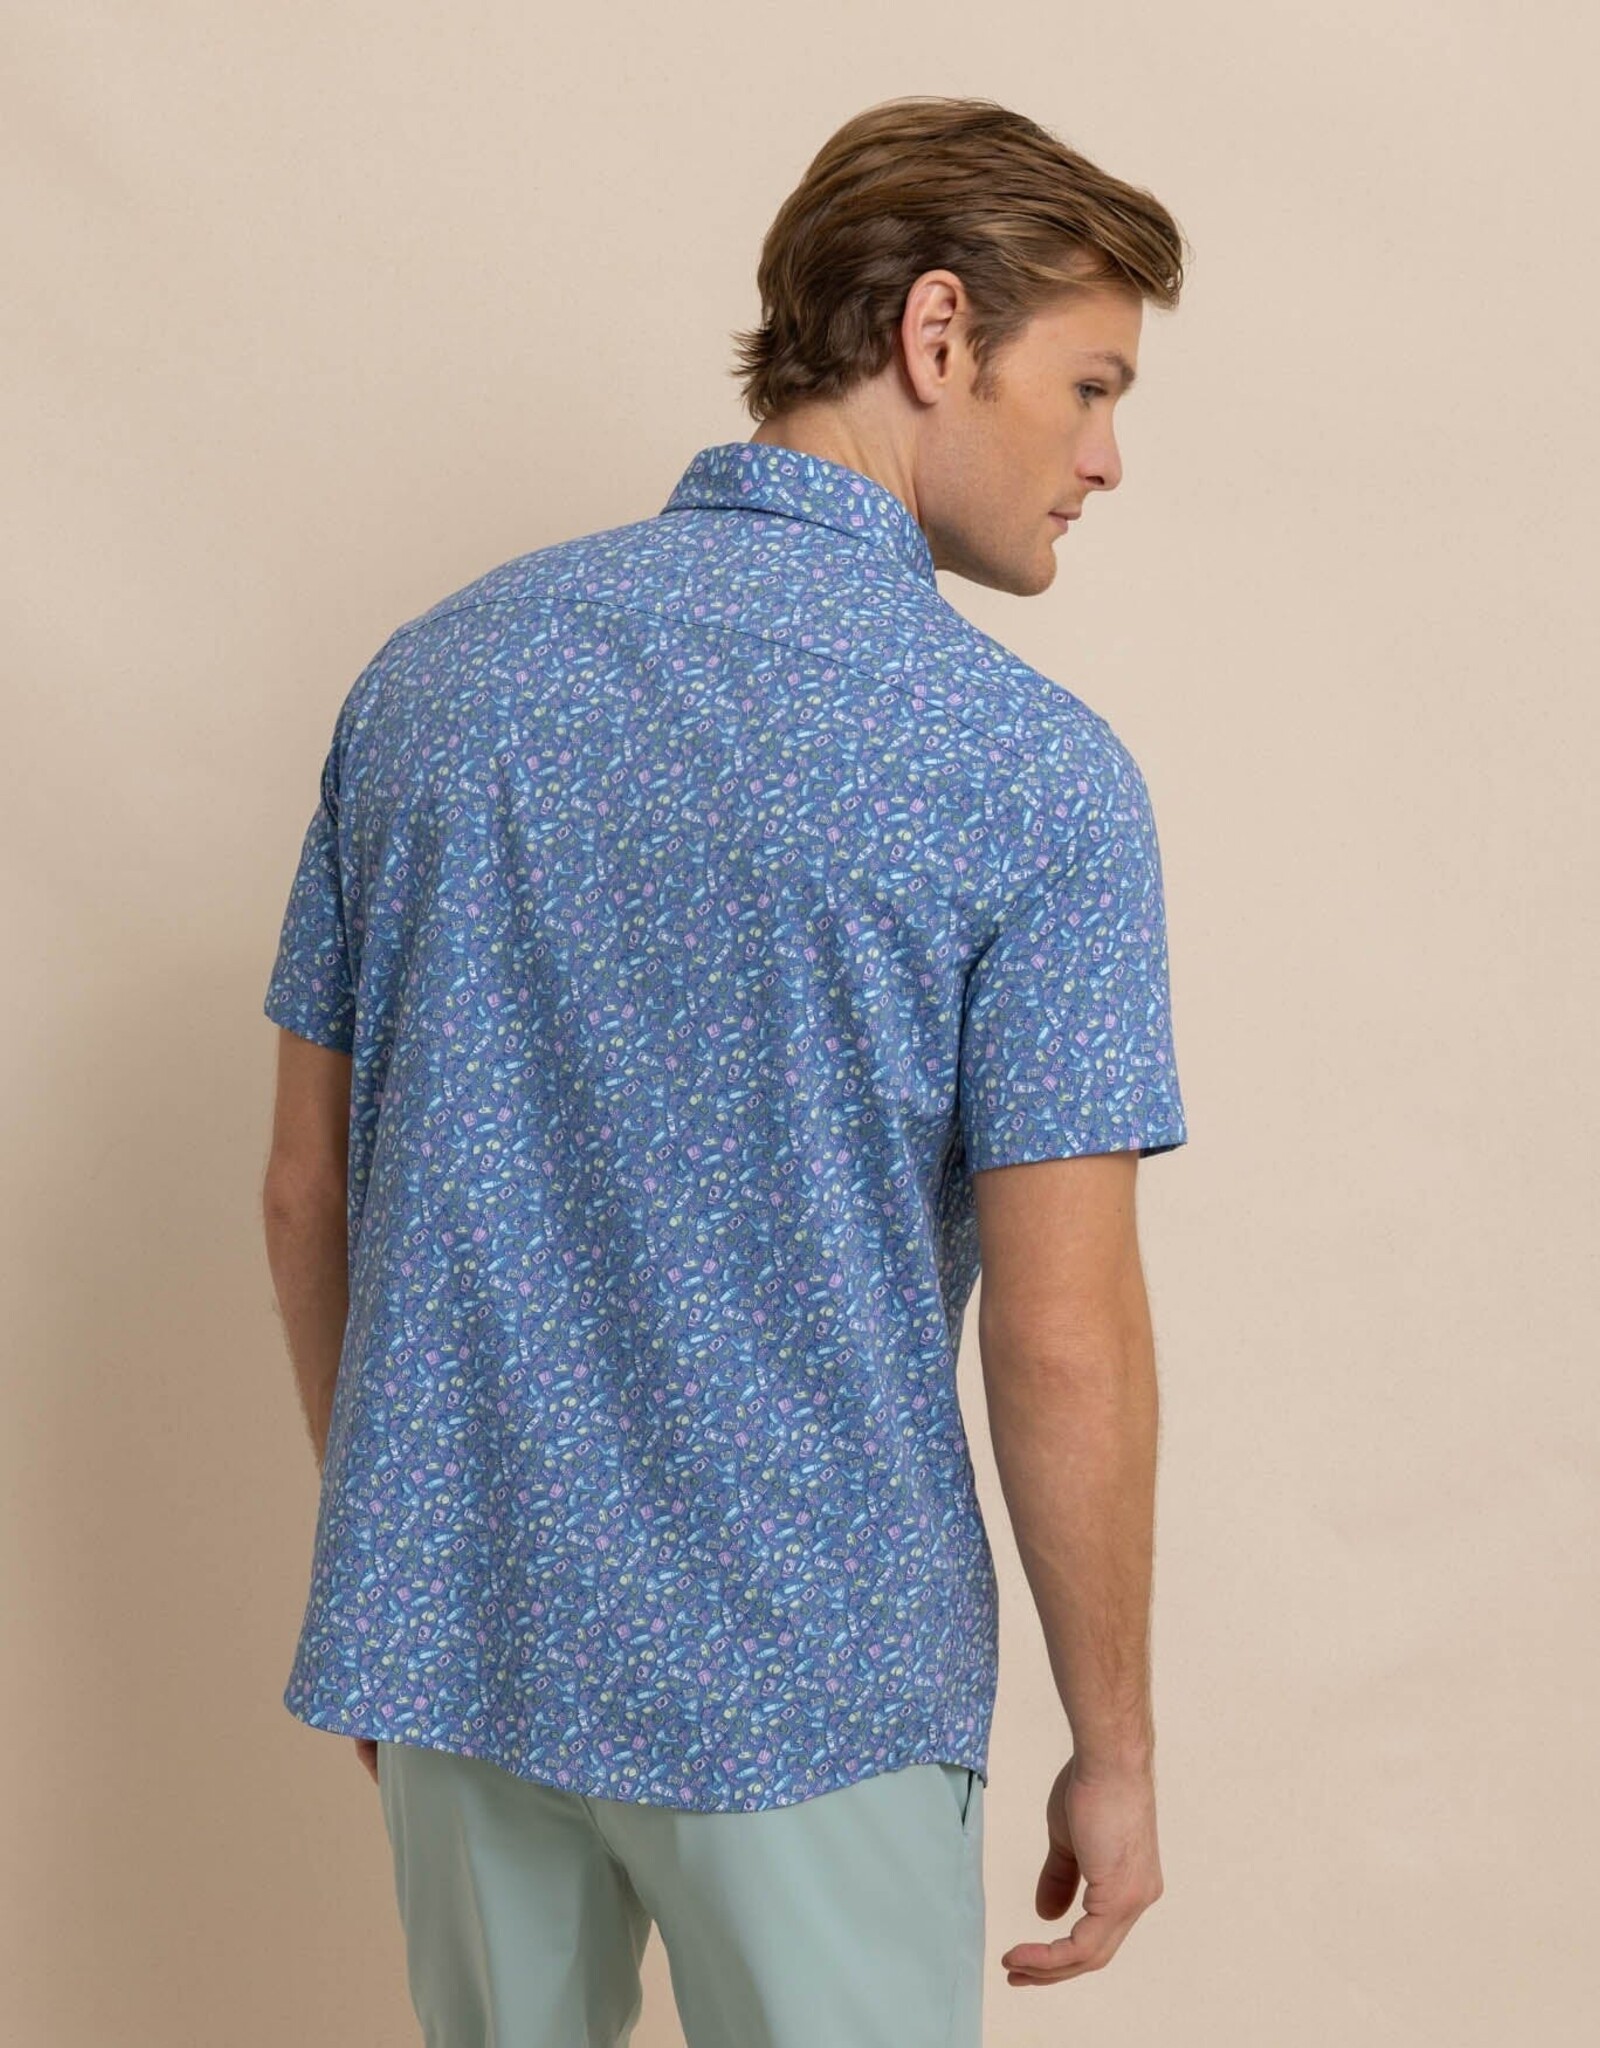 Southern Tide Dazed and Transfused Sportshirt